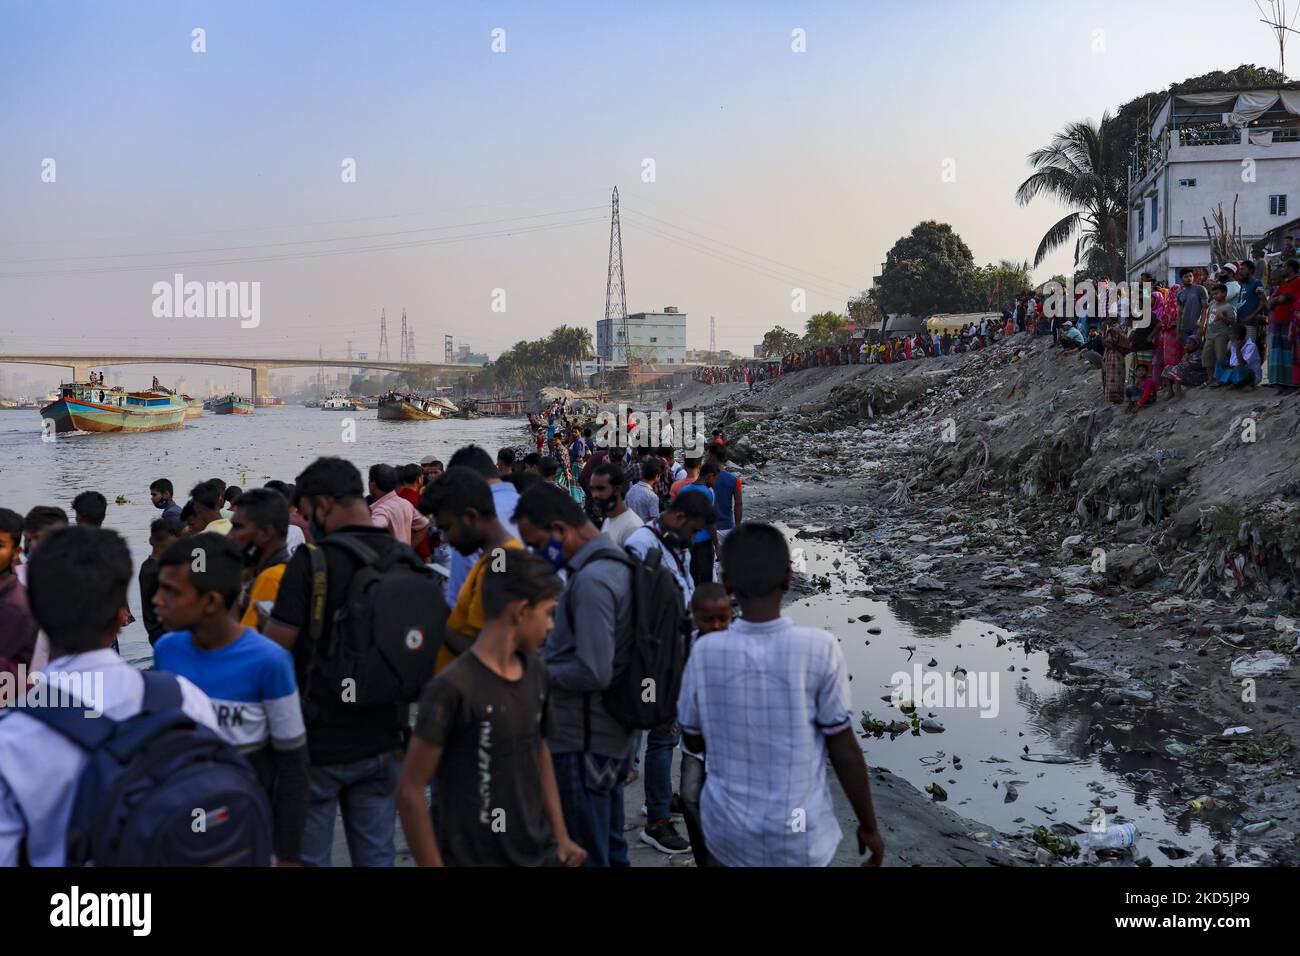 People gather at the bank of Shitalakshya river, where a ferry has sunk after colliding with a sand carrier ship in Narayanganj, Bangladesh on March 20, 2022. Six bodies were recovered, it is not clear immediately how many are still missing. (Photo by Kazi Salahuddin Razu/NurPhoto) Stock Photo